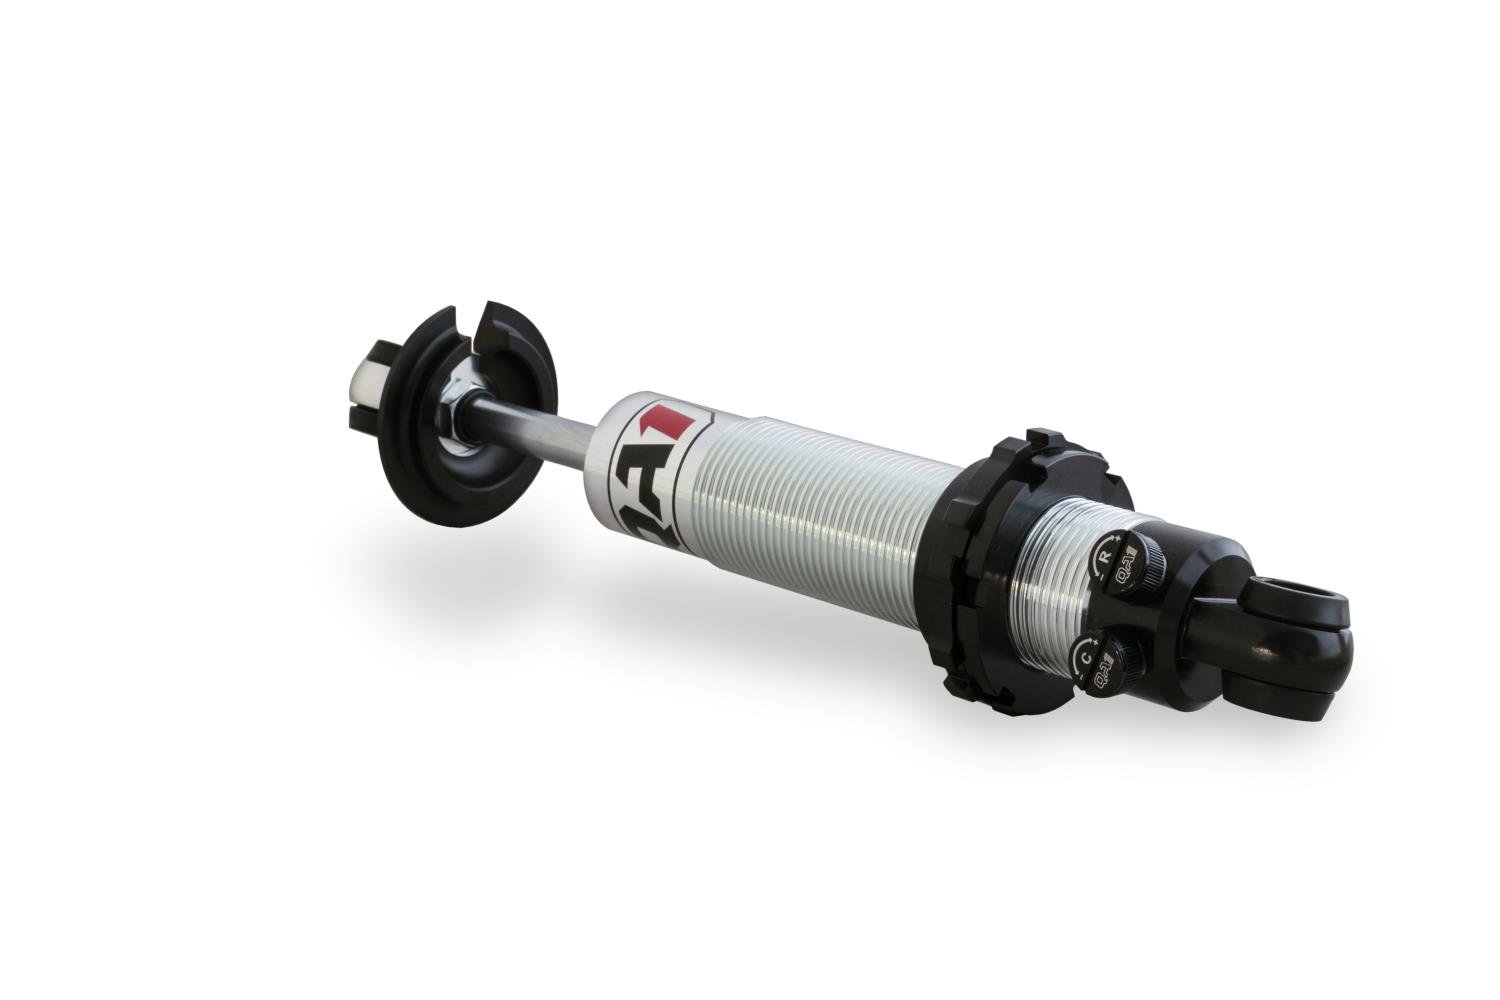 Double Adjustable Shock Compressed Height: 9-1/2"